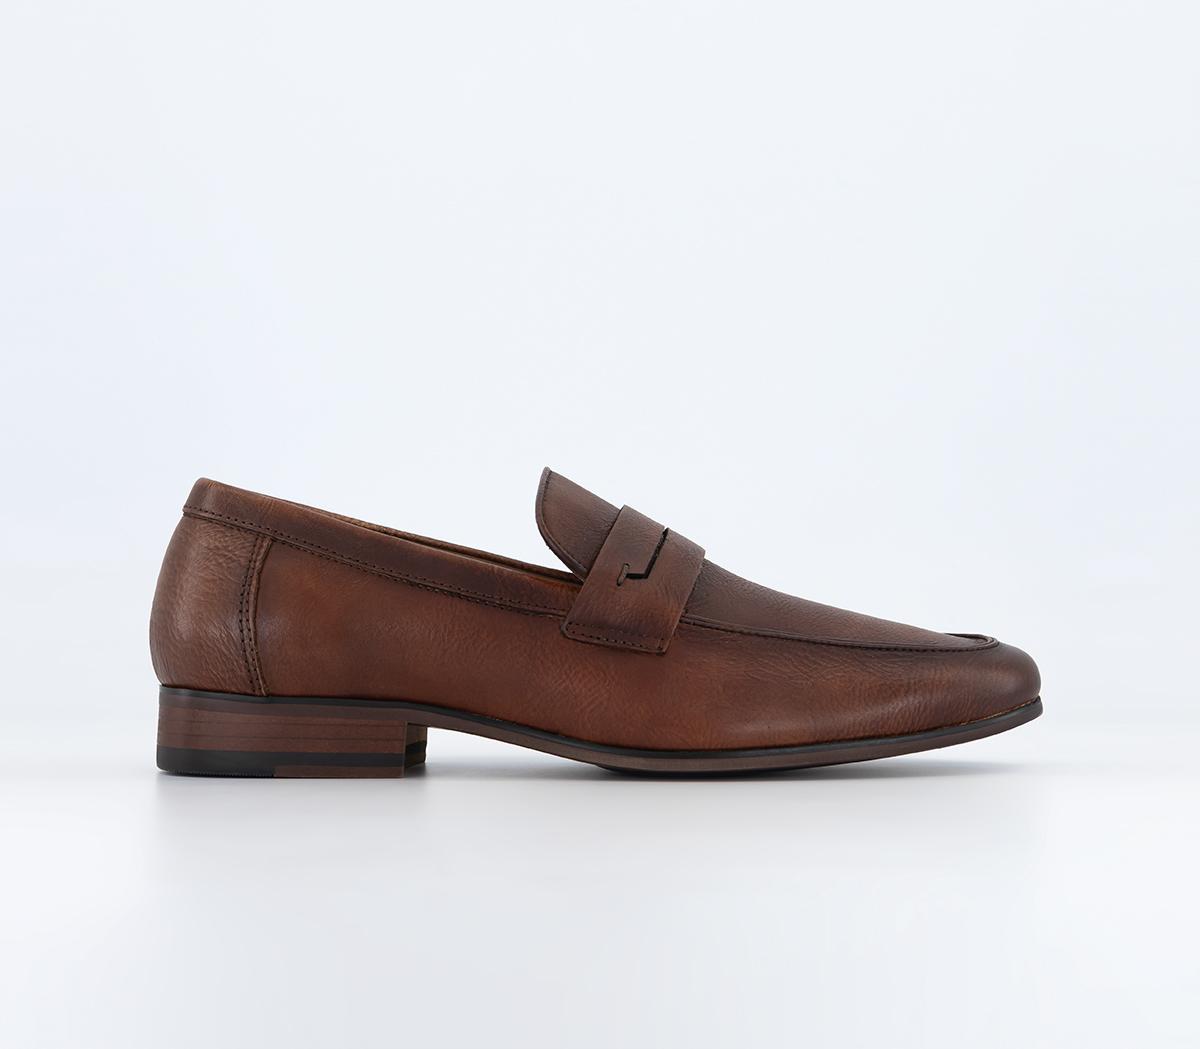 OFFICEMalibu Cut Out Saddle LoafersTan Leather